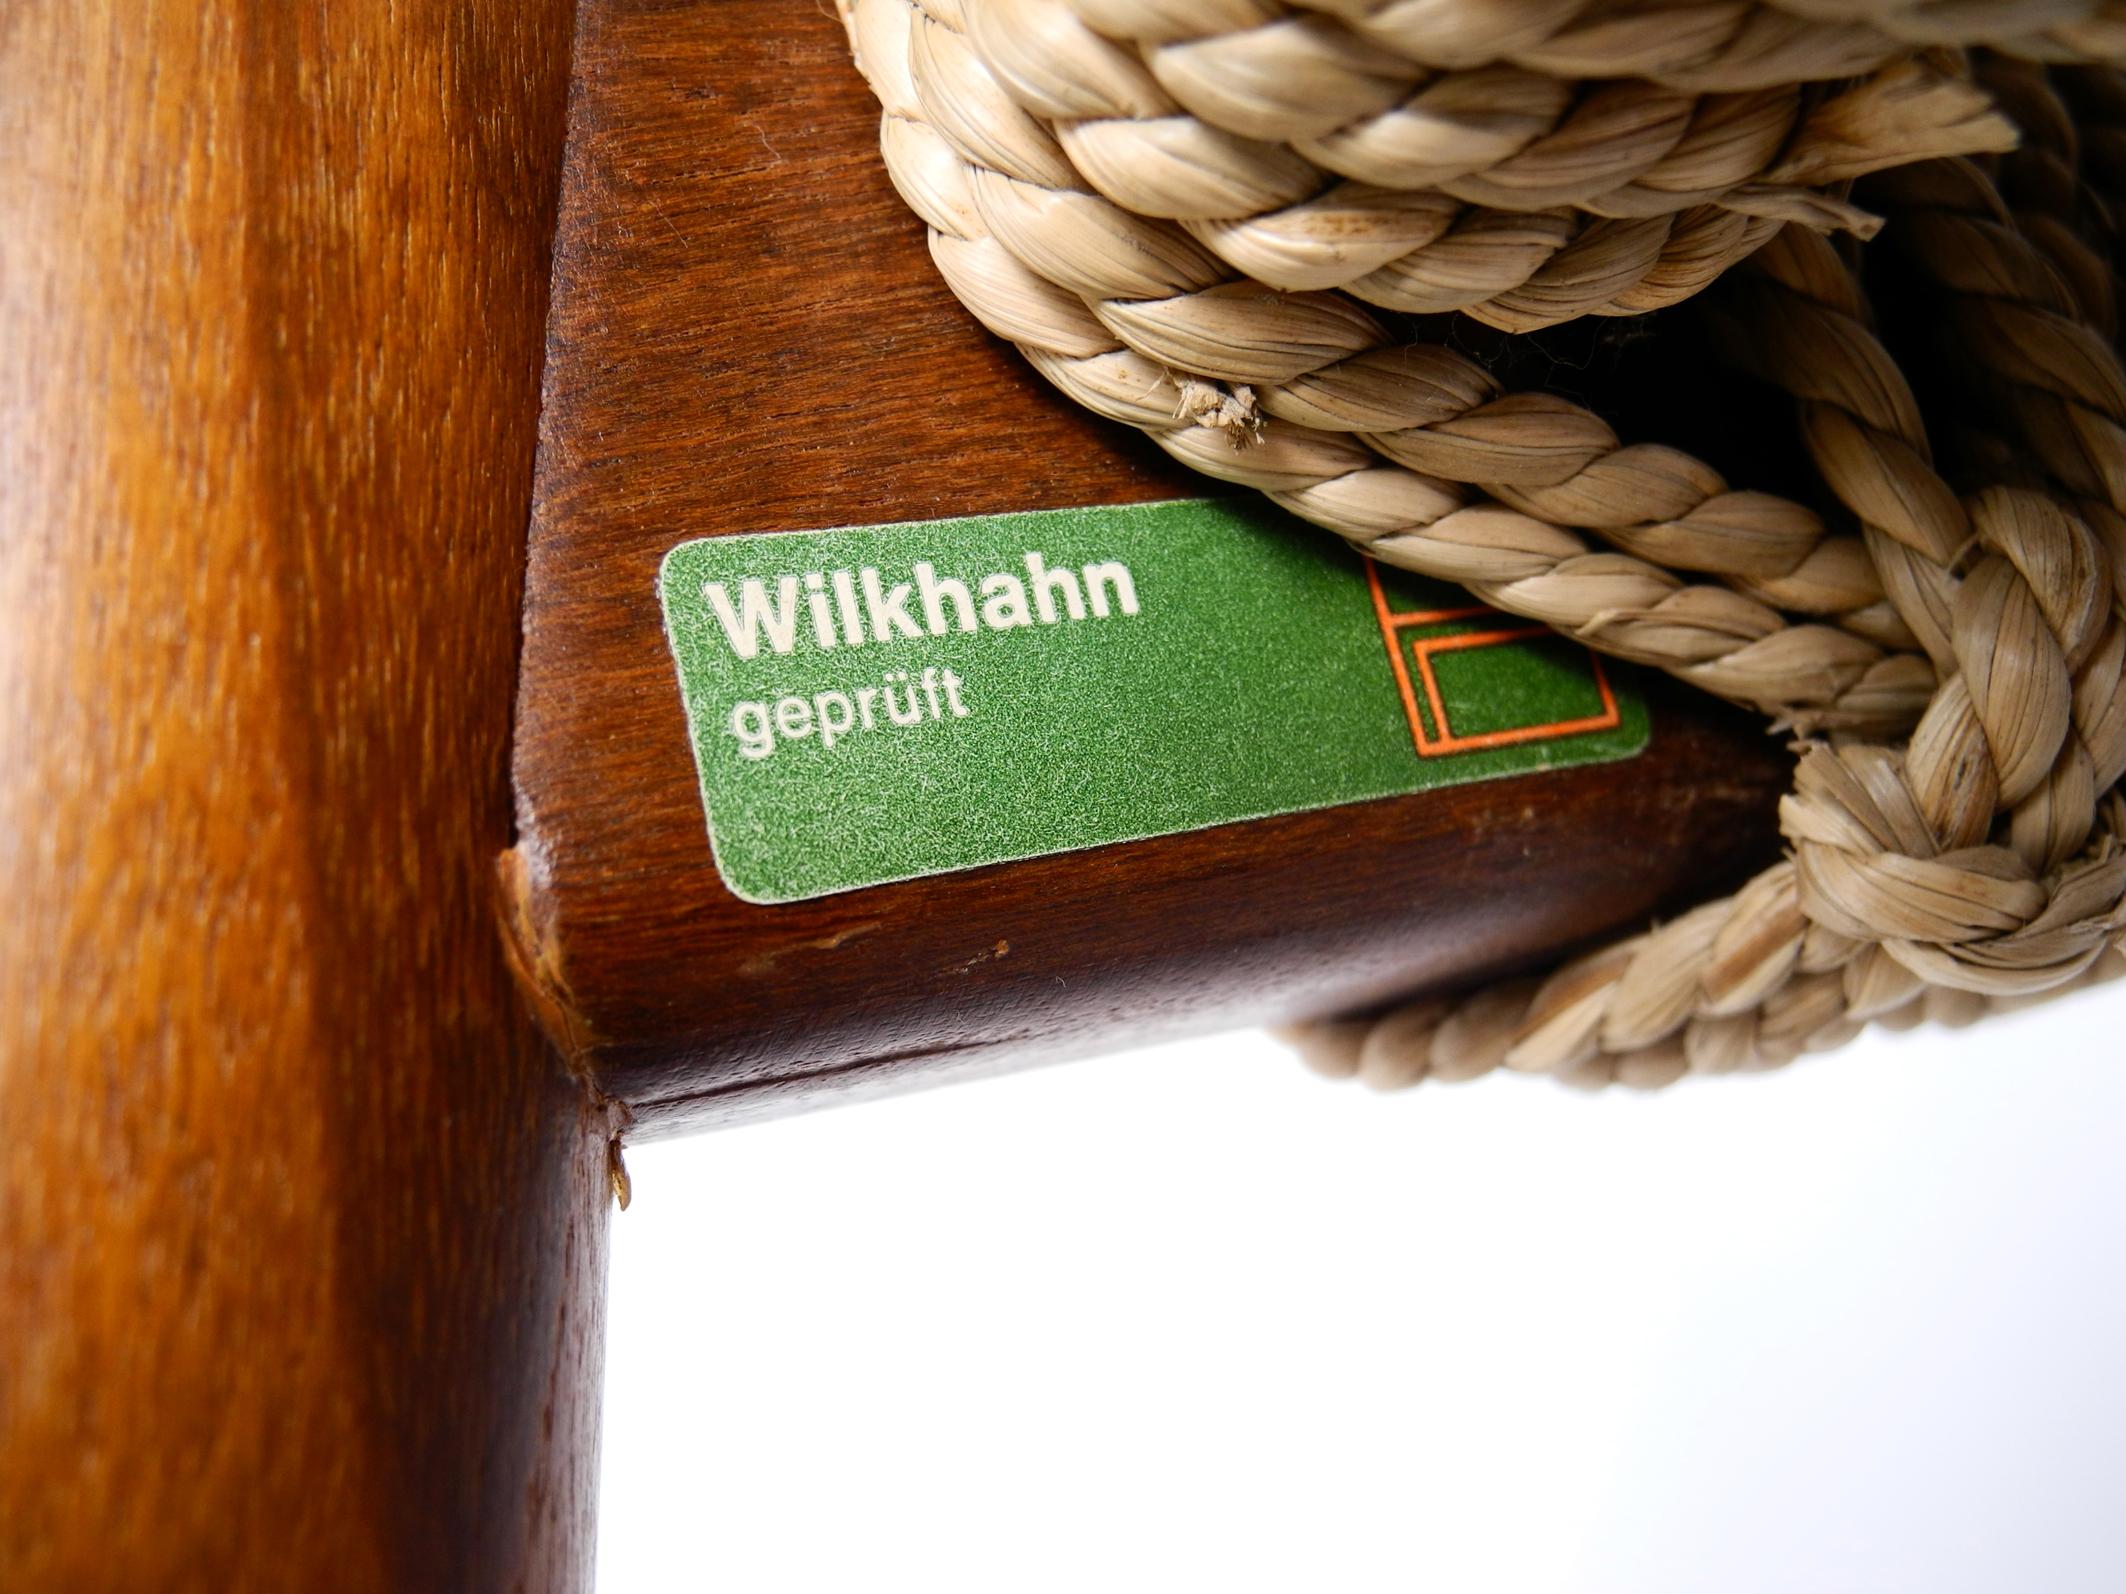 Two Original 1960s Wilkhahn Chairs Made of Walnut with Wicker Cane For Sale 1